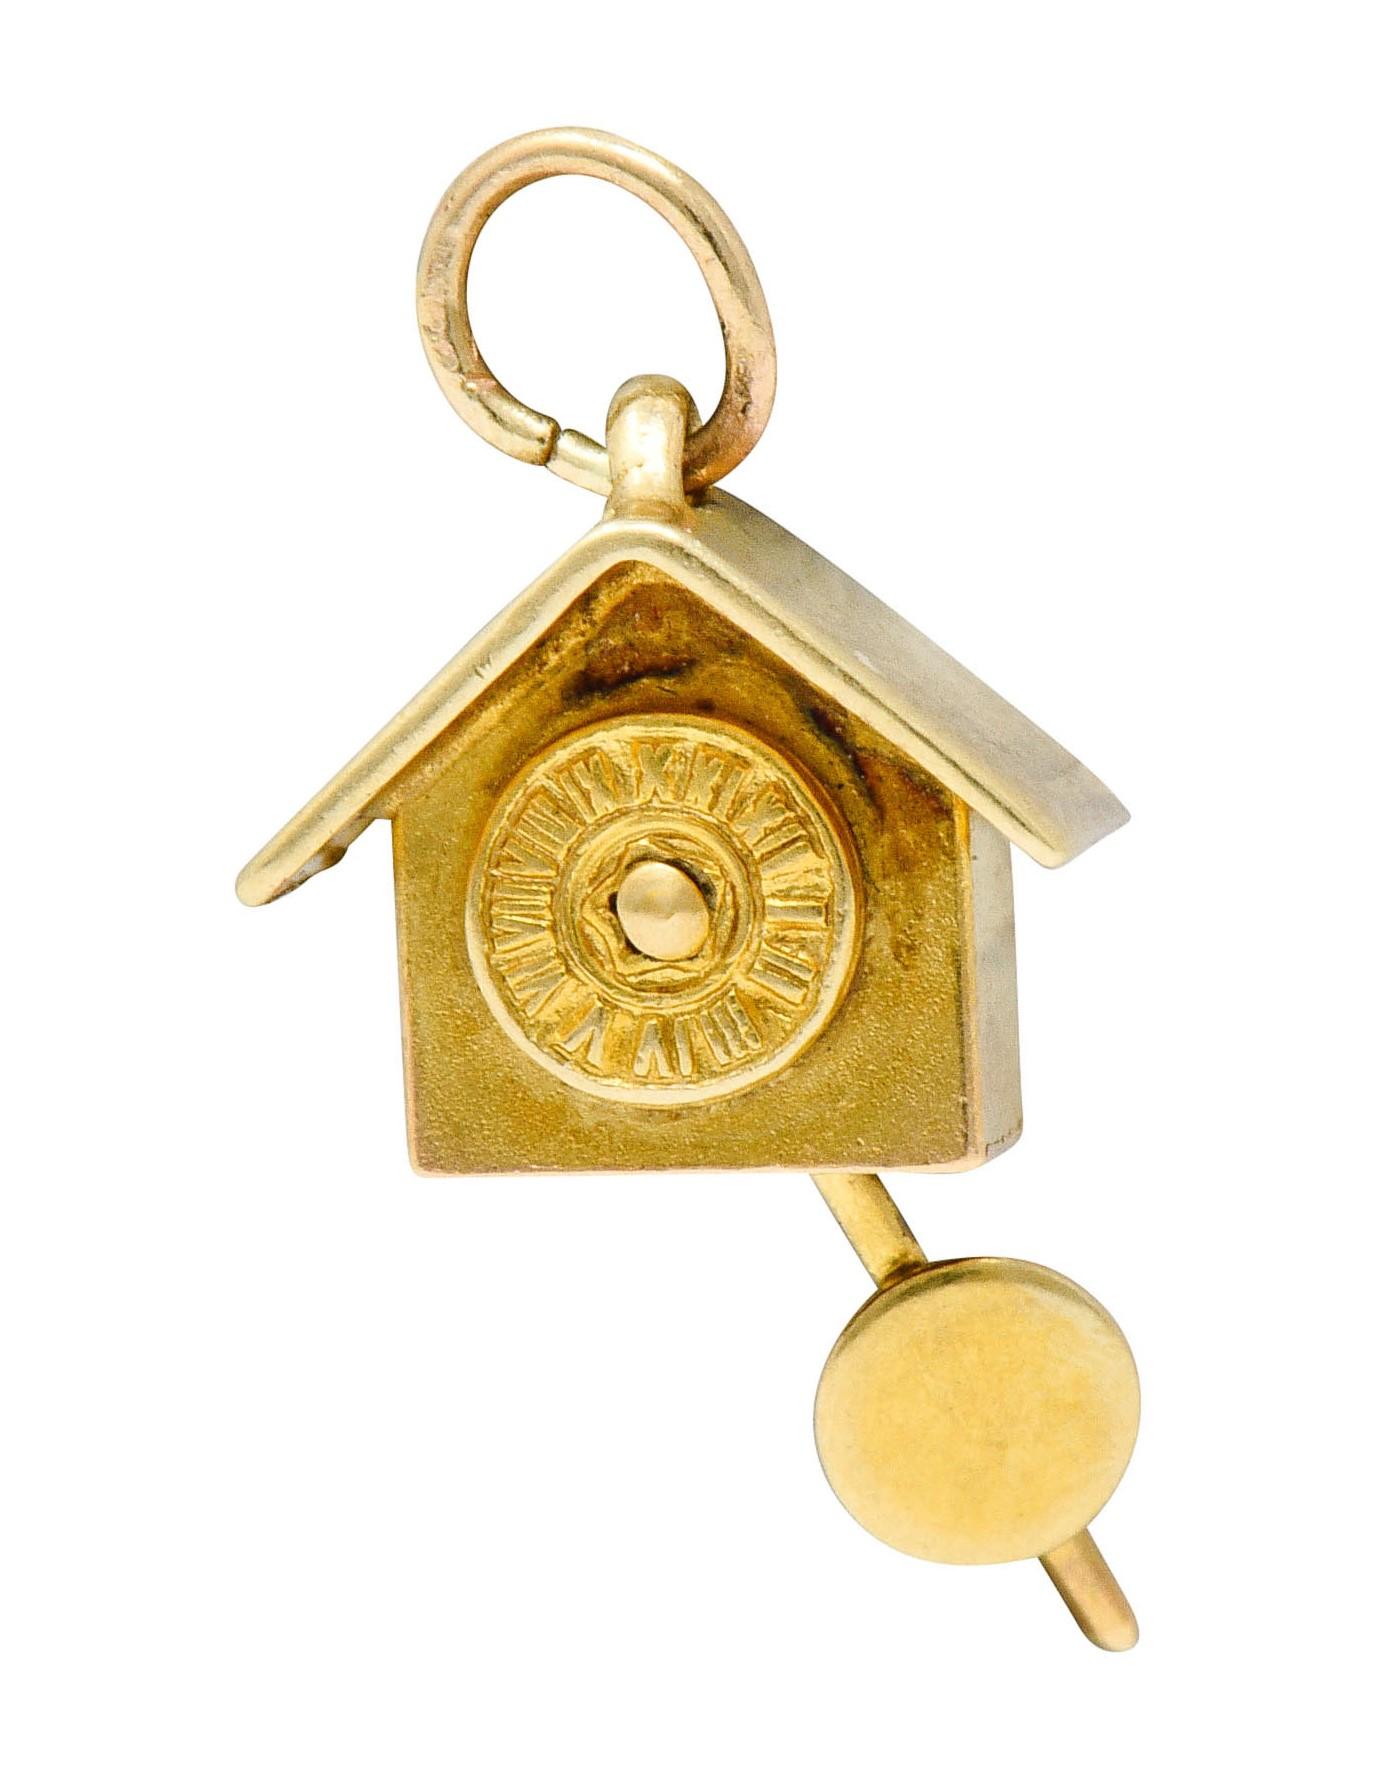 Designed as a cuckoo style clock with a pitched roof and circular face

Suspending an articulated pendulum

Completed by jump ring bale

Stamped 14KT for 14 karat gold

With maker's mark for Carl-Art Inc.

Circa: 1940s

Measures: 3/8 x 3/4